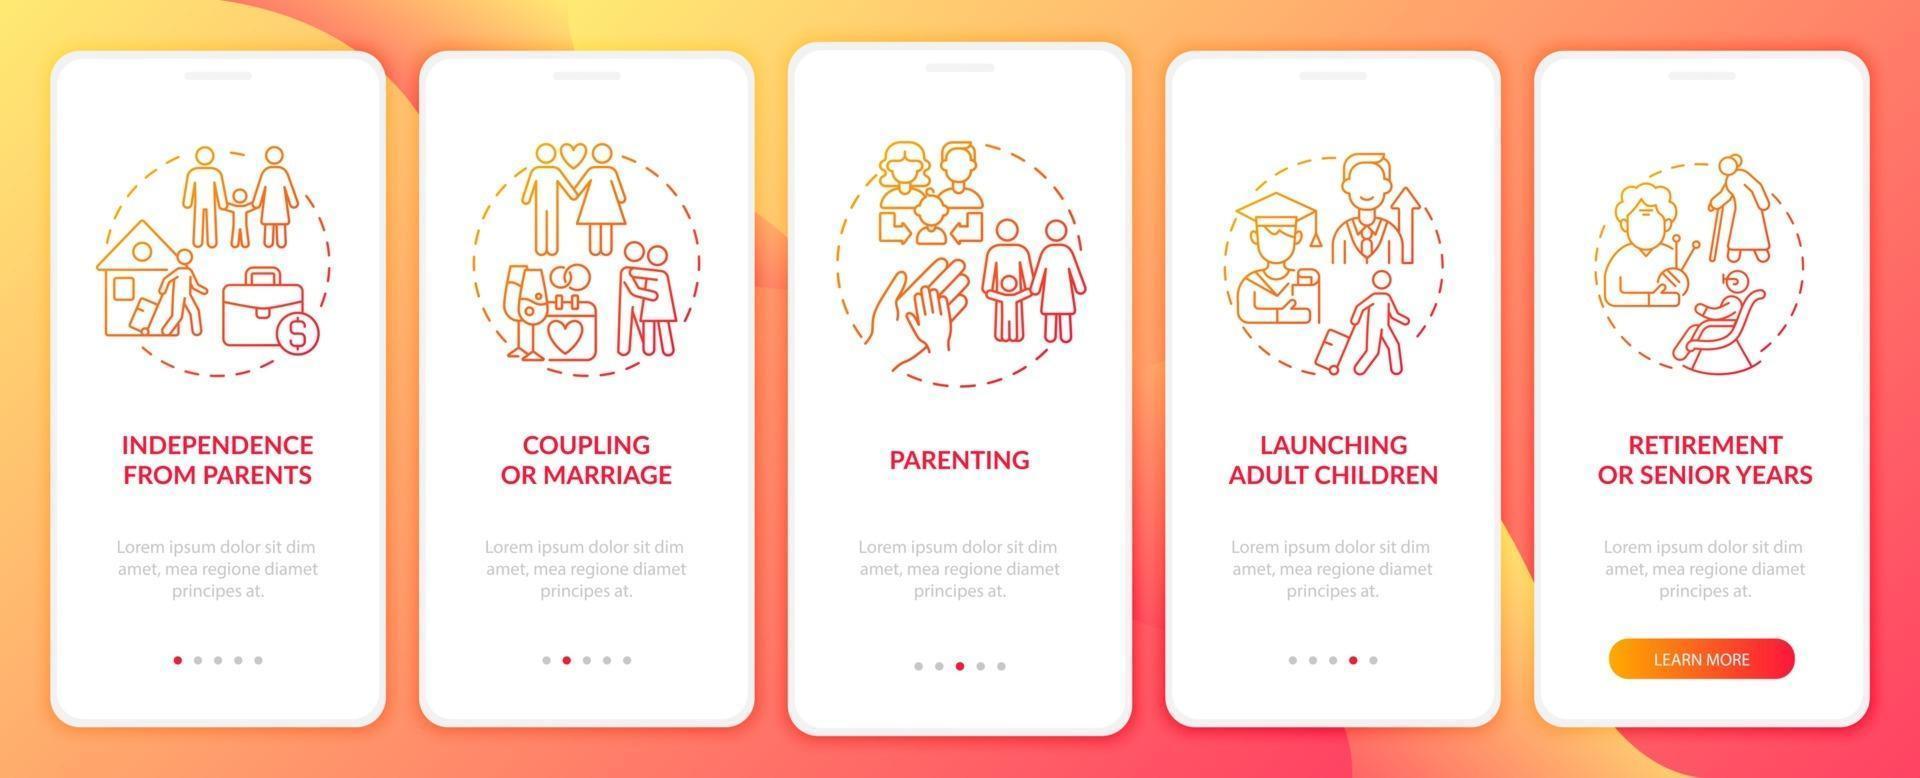 Launching adult children onboarding mobile app page screen vector